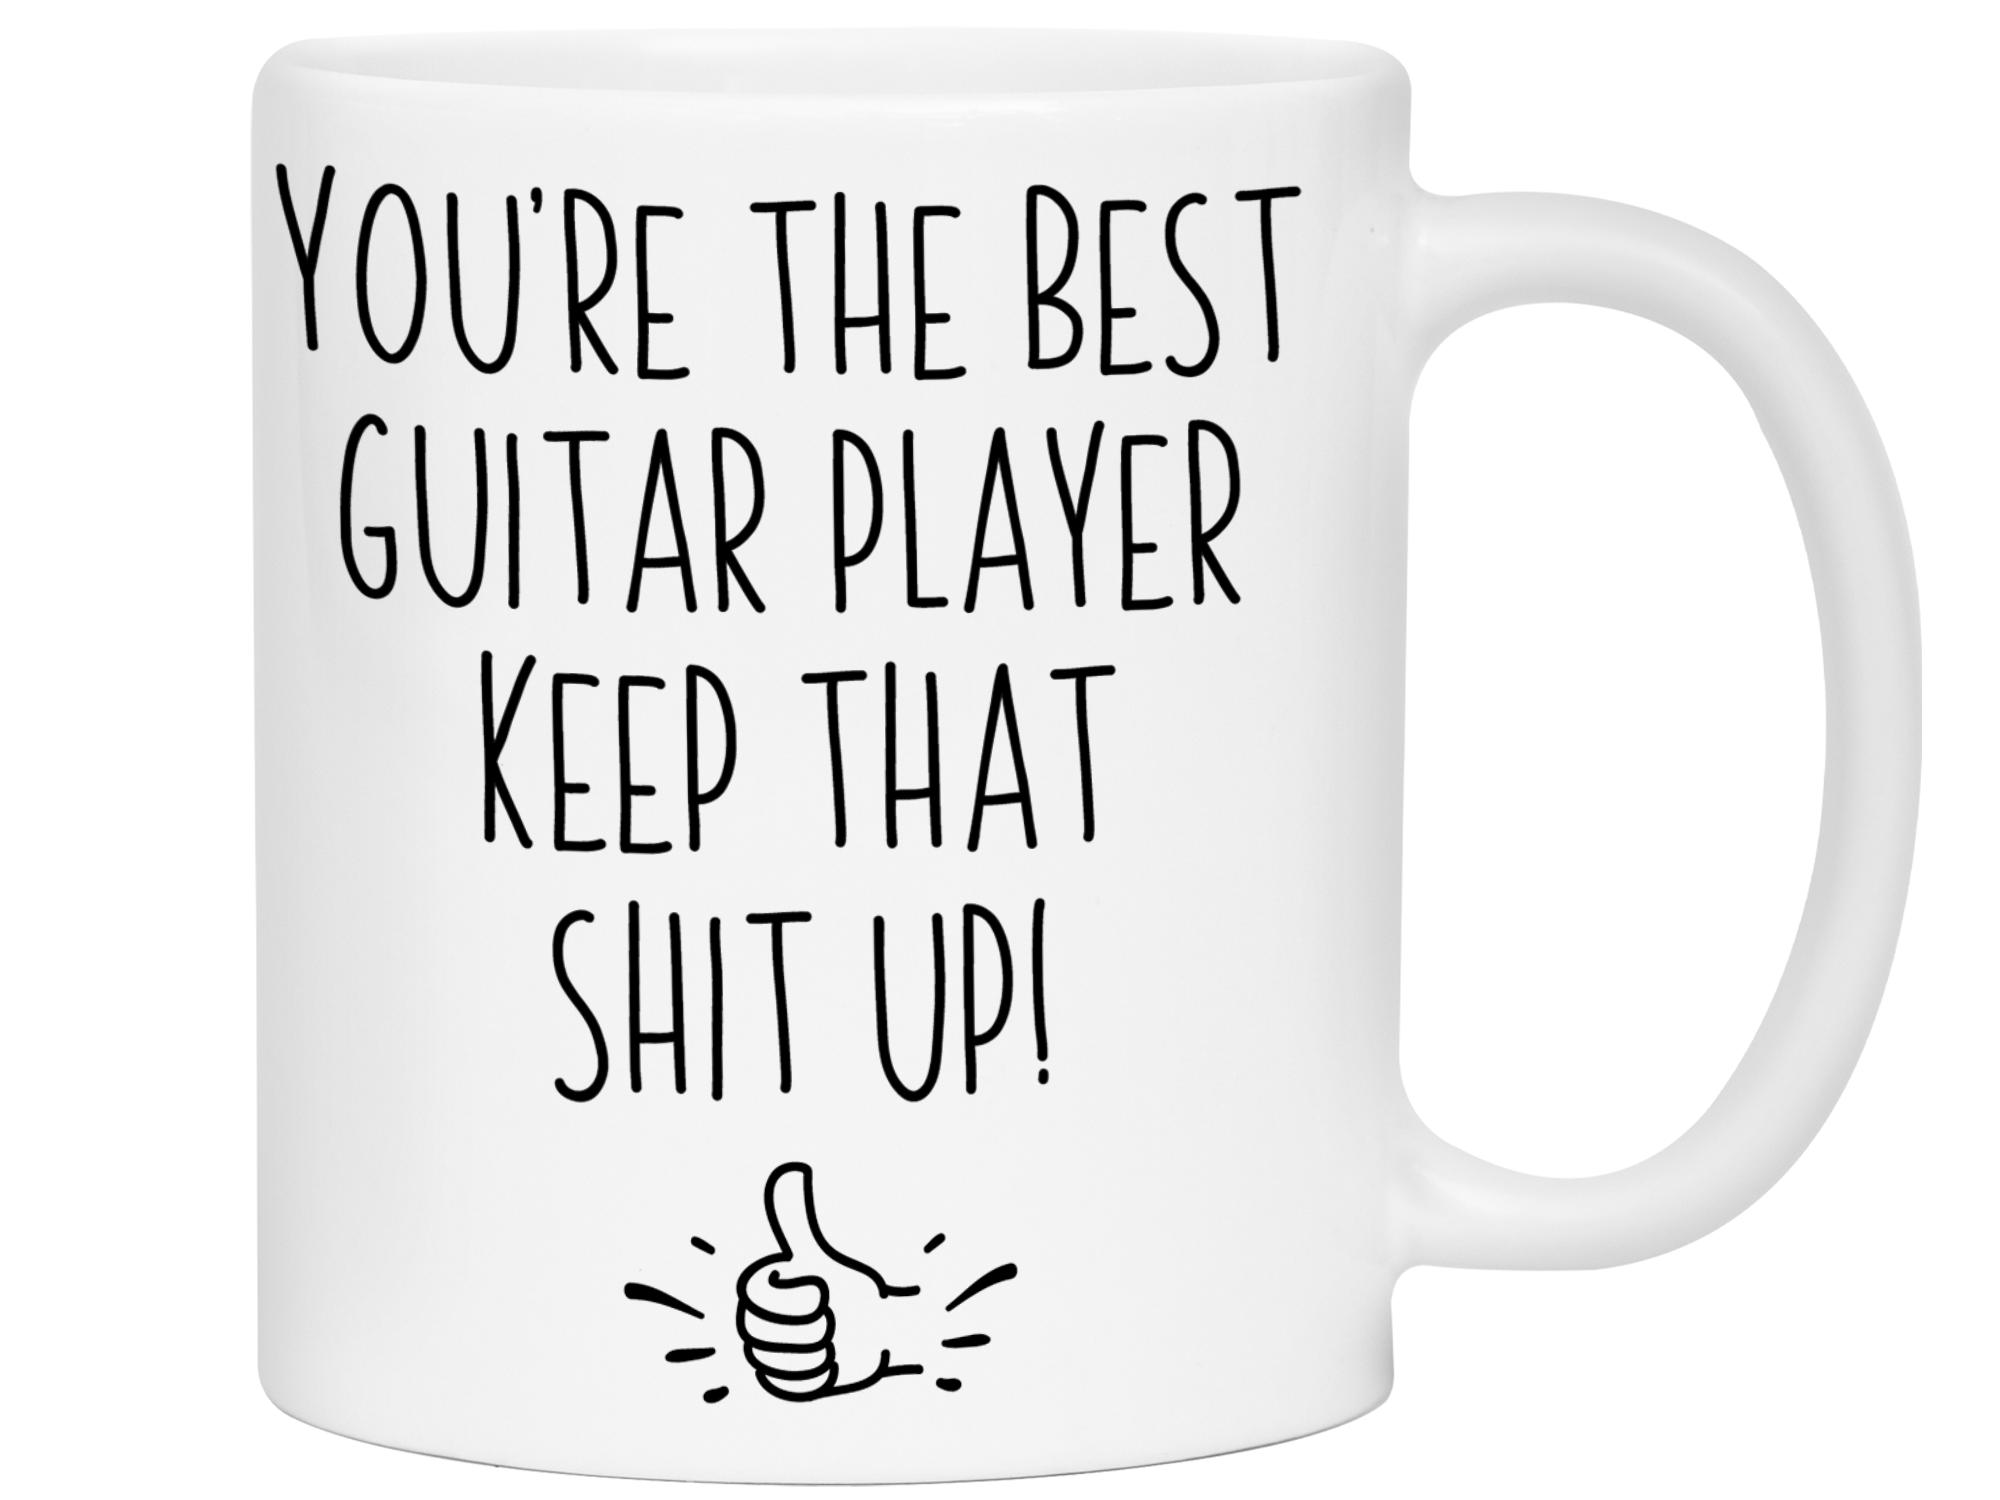 Guitar Player Funny Gifts - You're the Best Guitar Player Keep That Shit Up Gag Coffee Mug